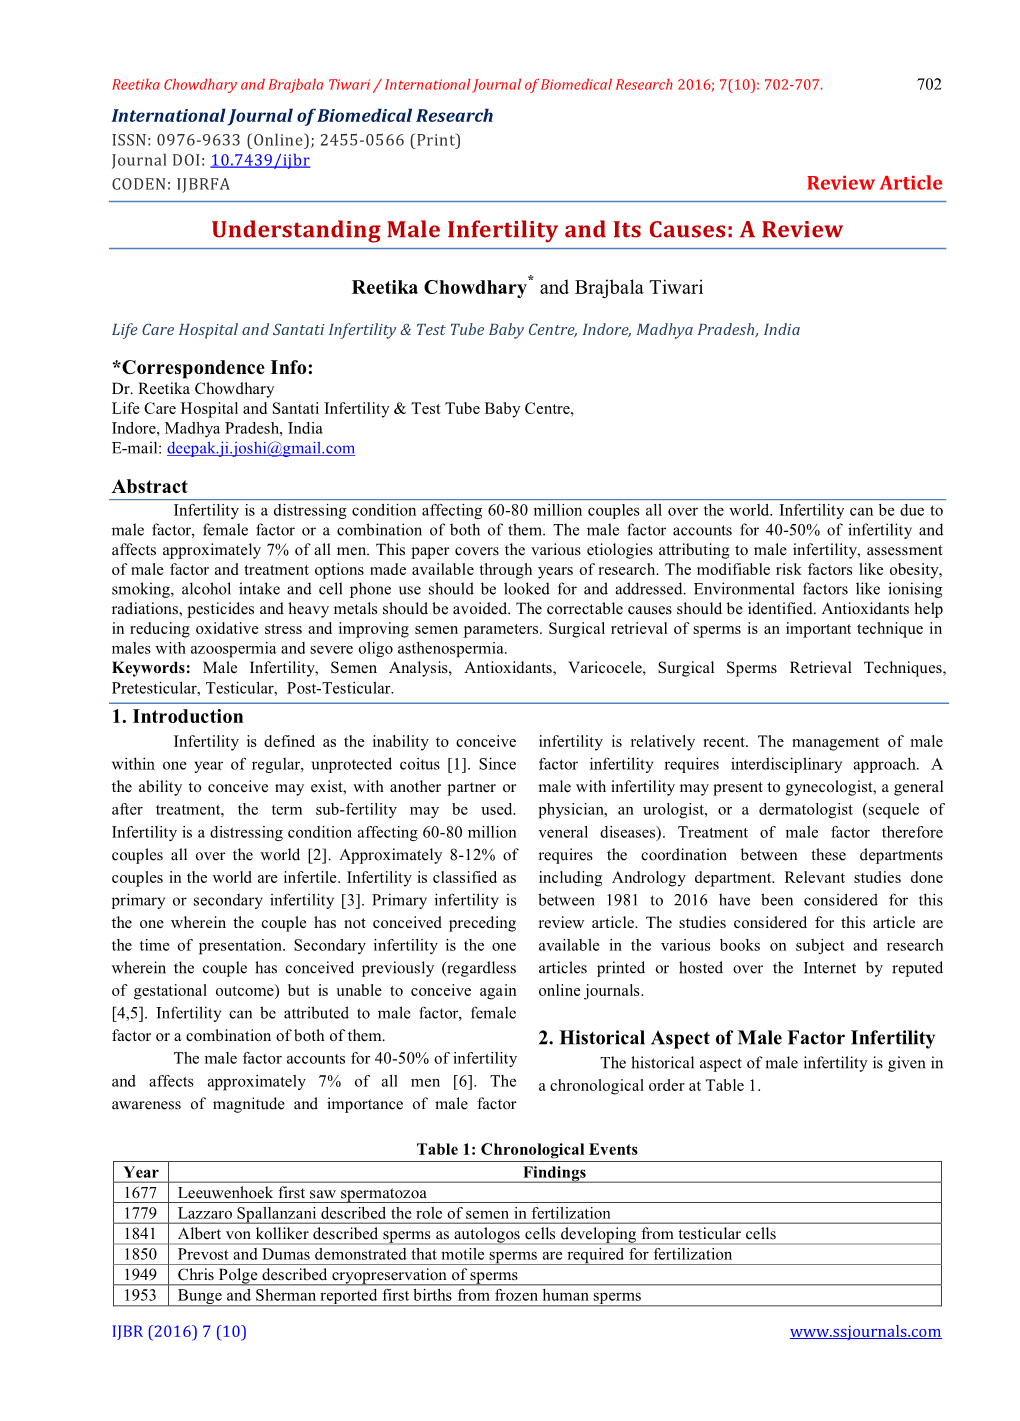 Understanding Male Infertility and Its Causes: a Review